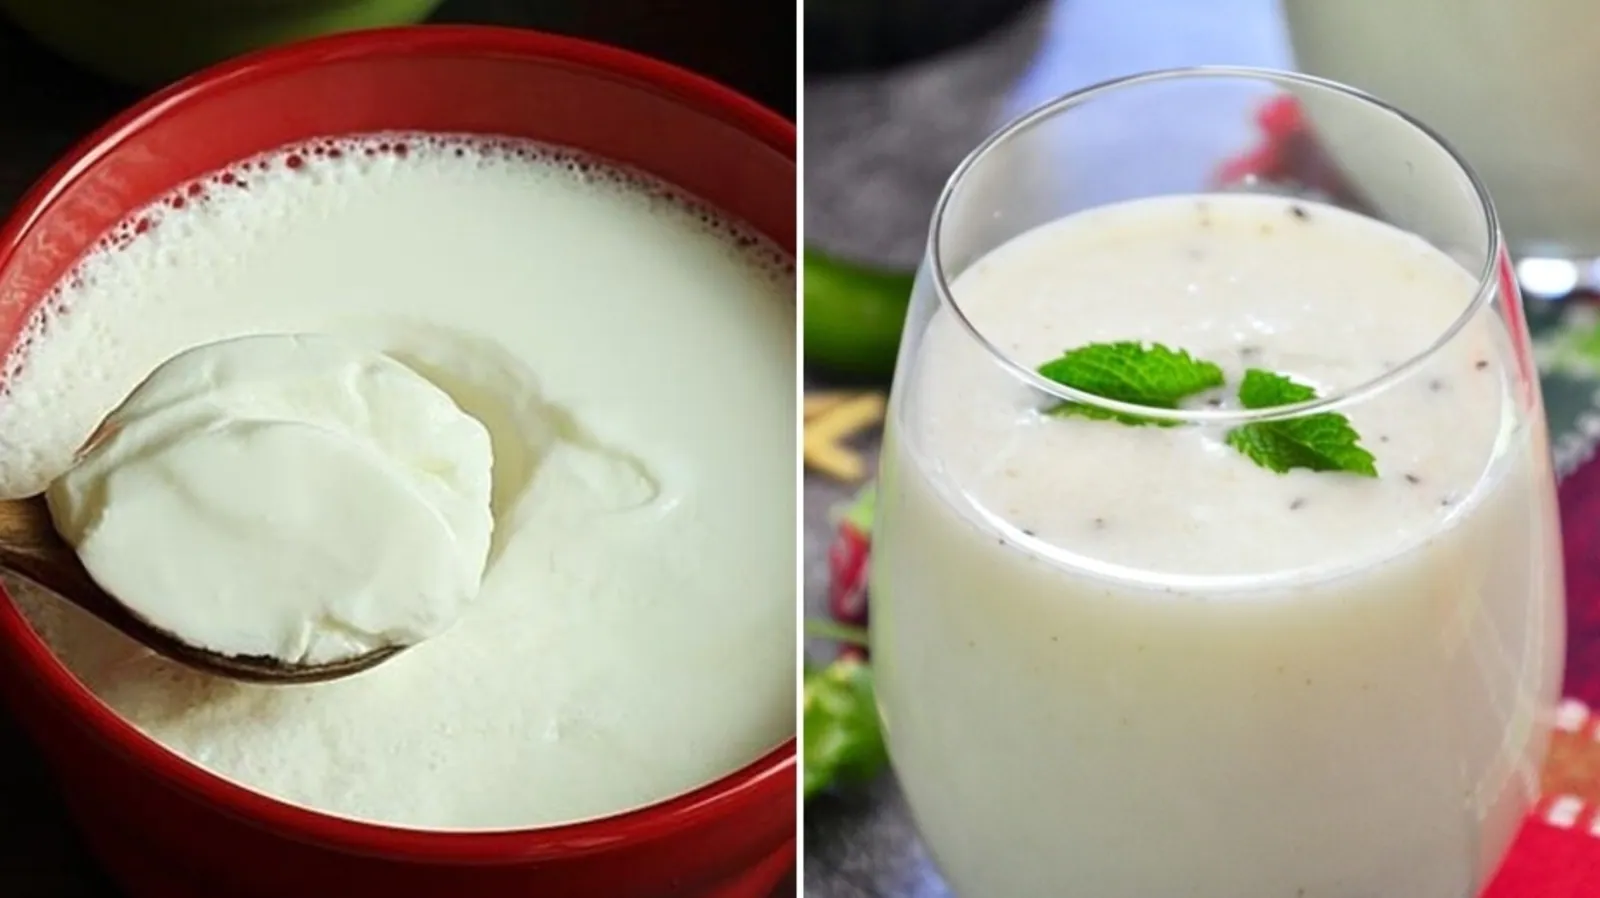 Is it safe to eat curd every day